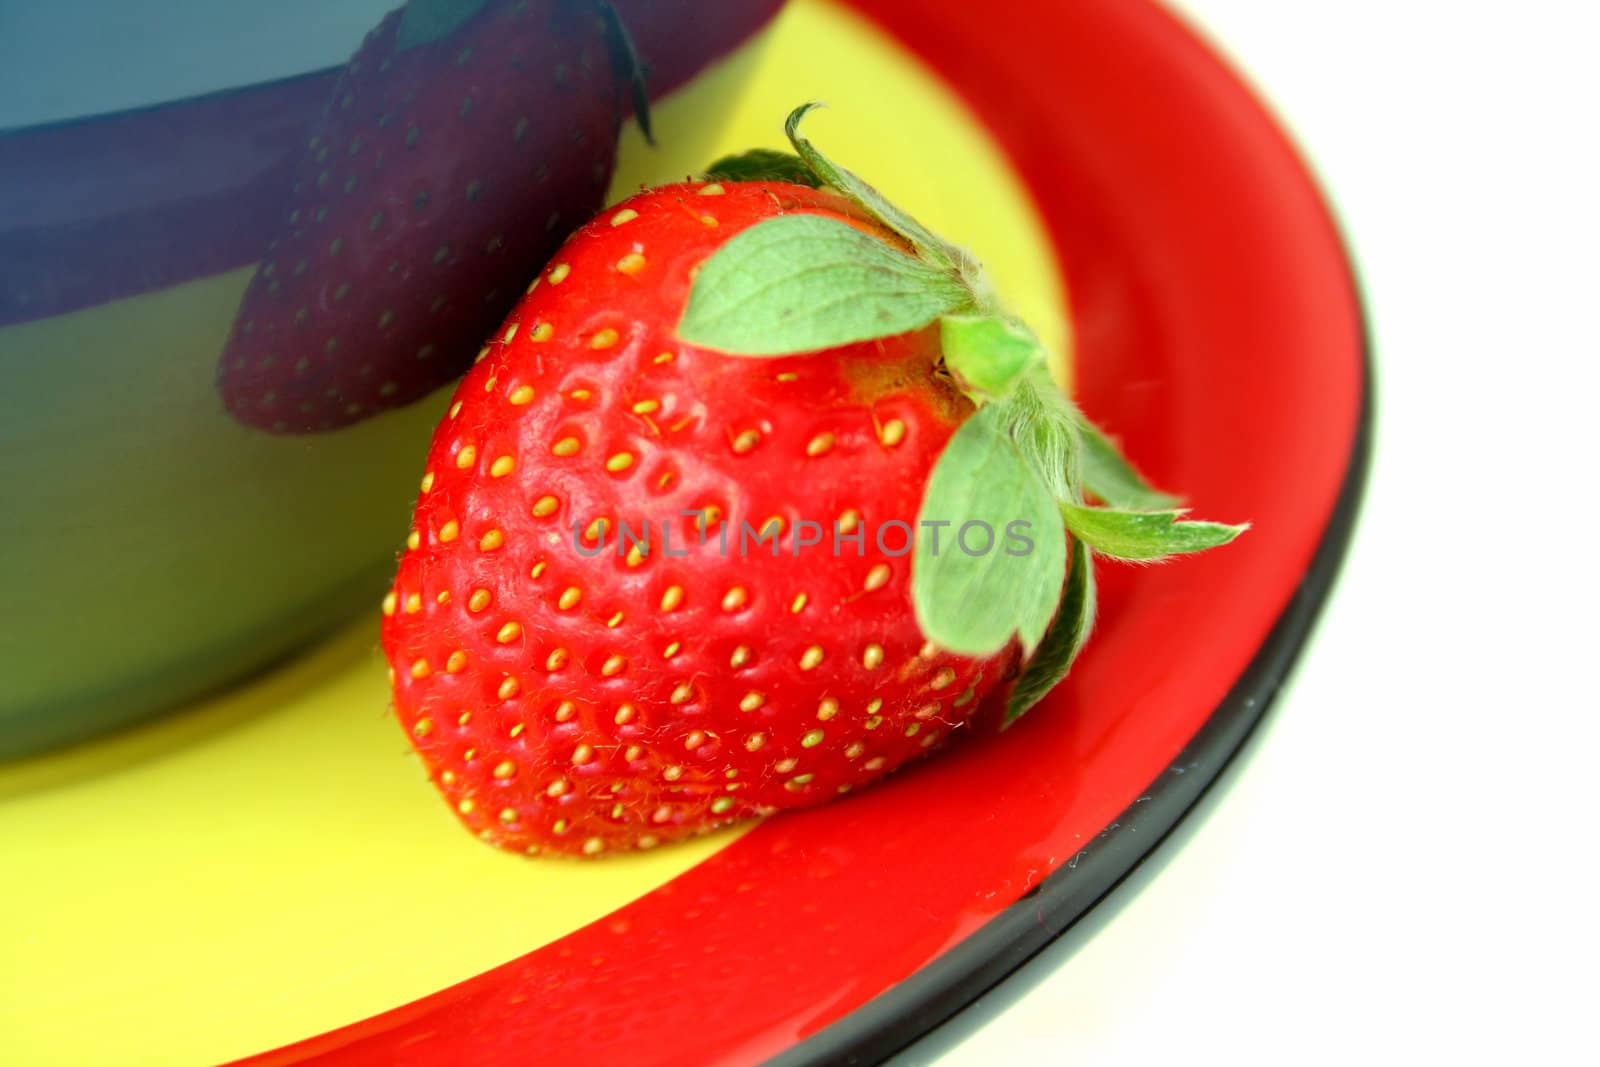 A single strawberry on a colorful coordinated plate isolated on a white background.